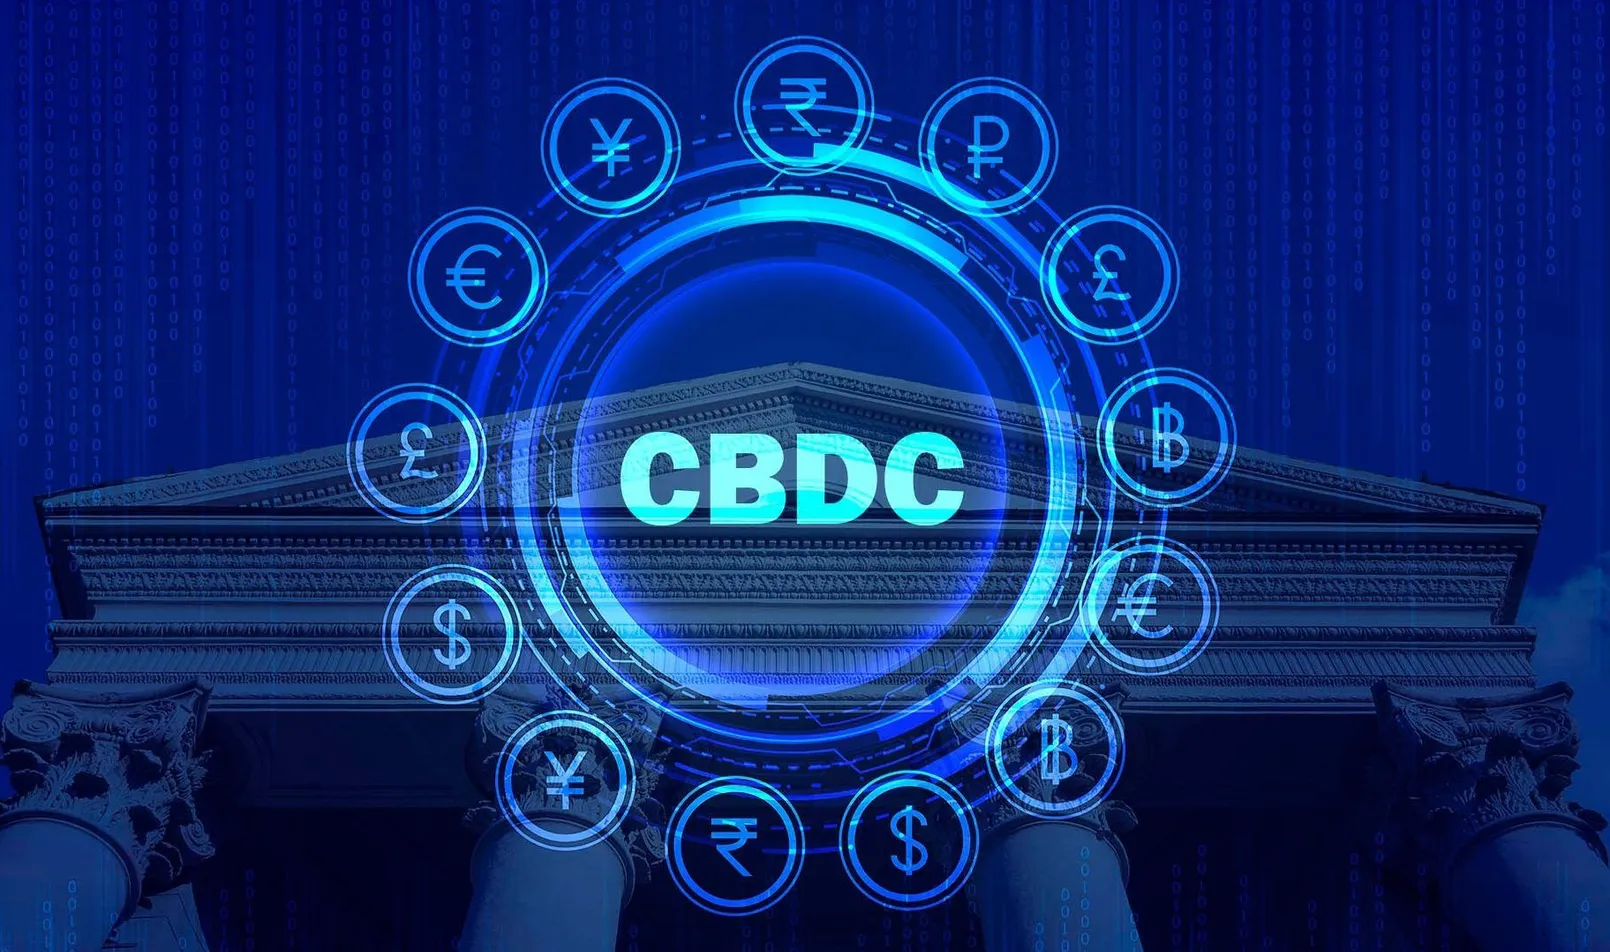 Frances Central Bank Digital Currency Cbdc Enters a the Next Phase Candidates to Test for Interbank Settlements.jpeg.jpg